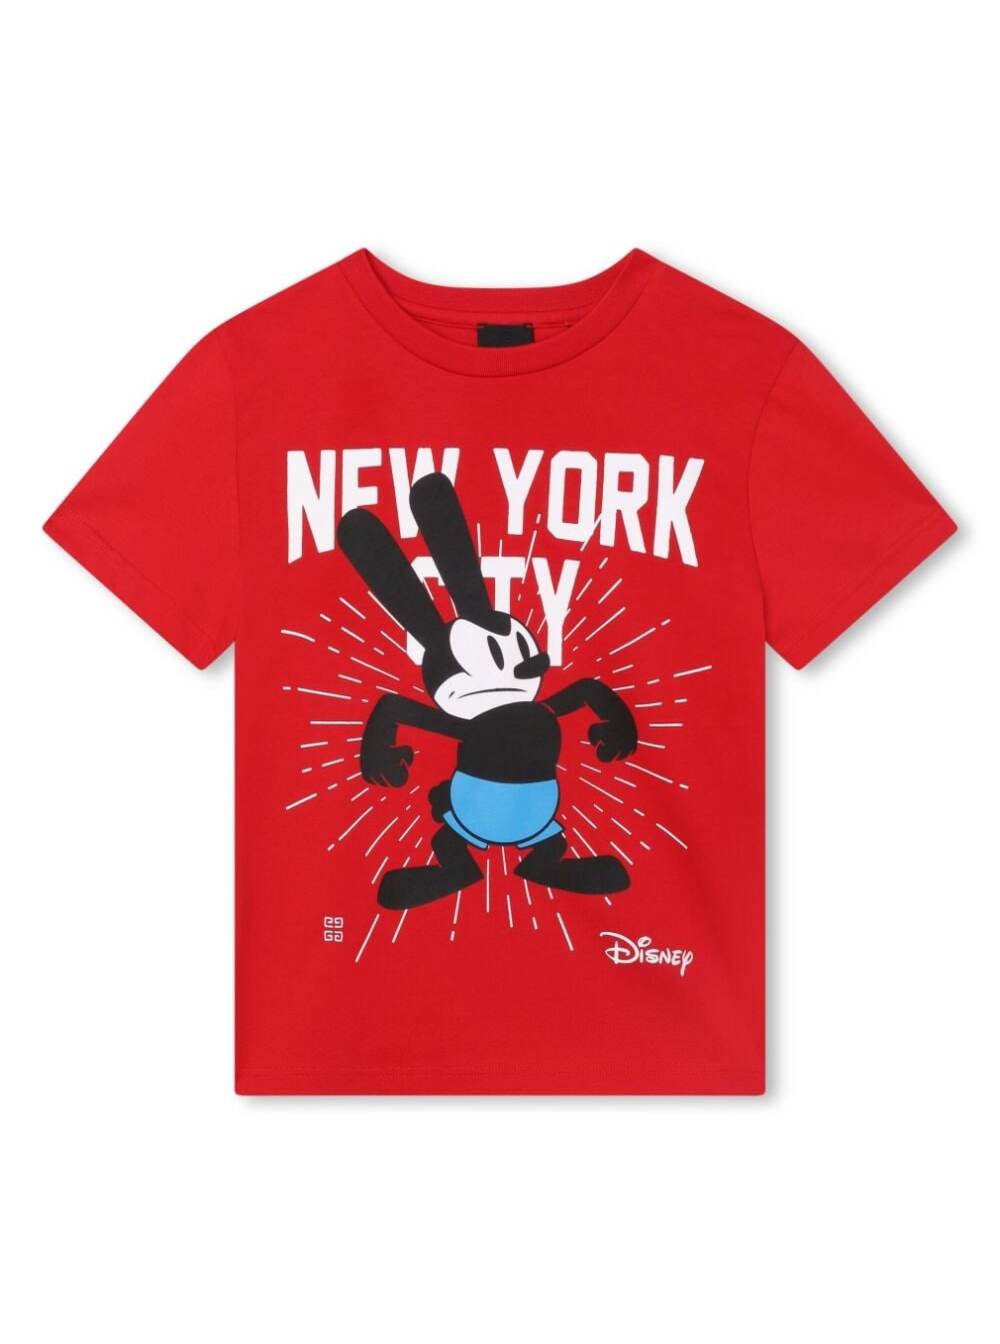 GIVENCHY RED T-SHIRT WITH DISNEY CARTOON PRINT AND LOGO IN COTTON BOY